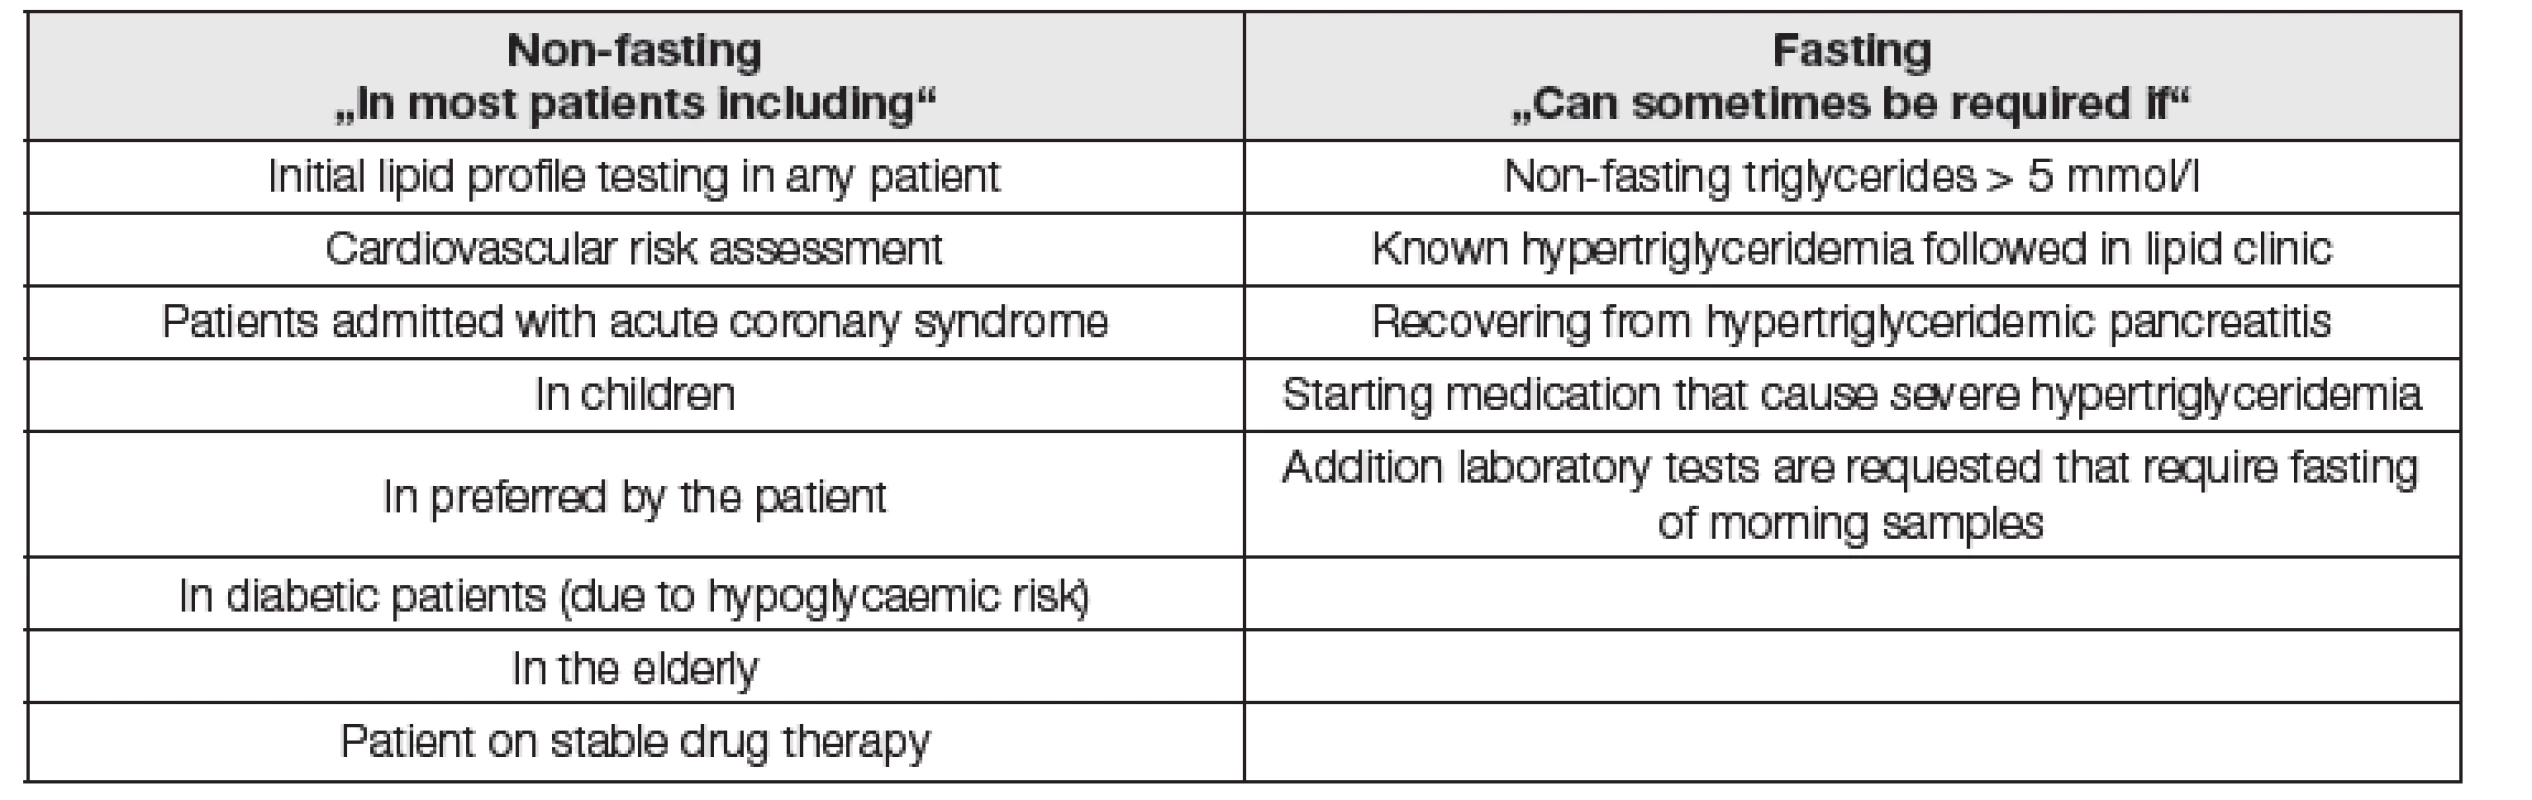 Examples of circumstances when fasting and non-fasting blood sampling for lipid measurement was used